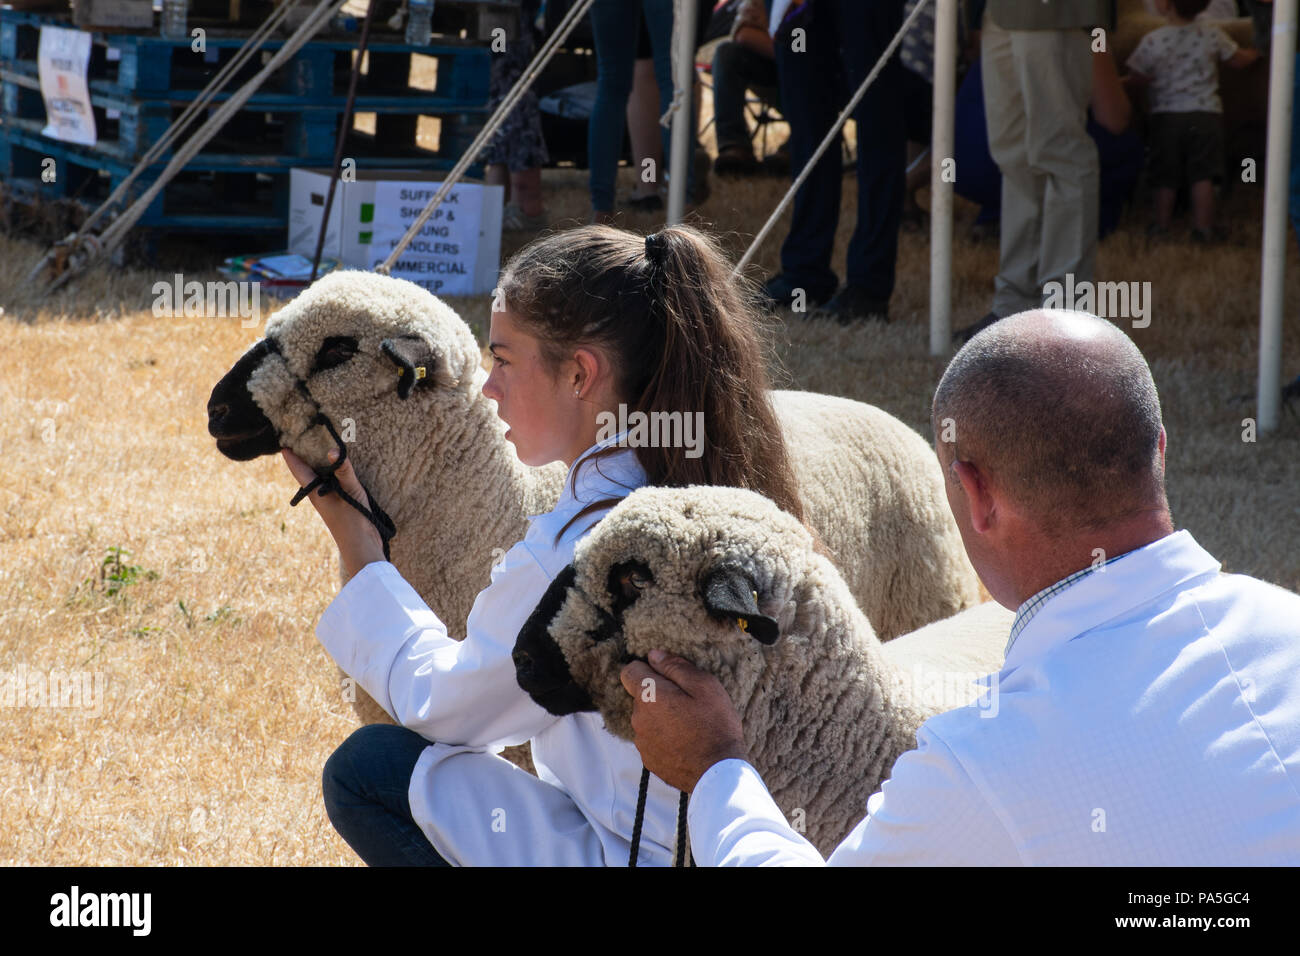 Tendring Essex  UK  - 14 July 2018: Young girl  exhibiting Pedigree sheep at agricultural show Stock Photo